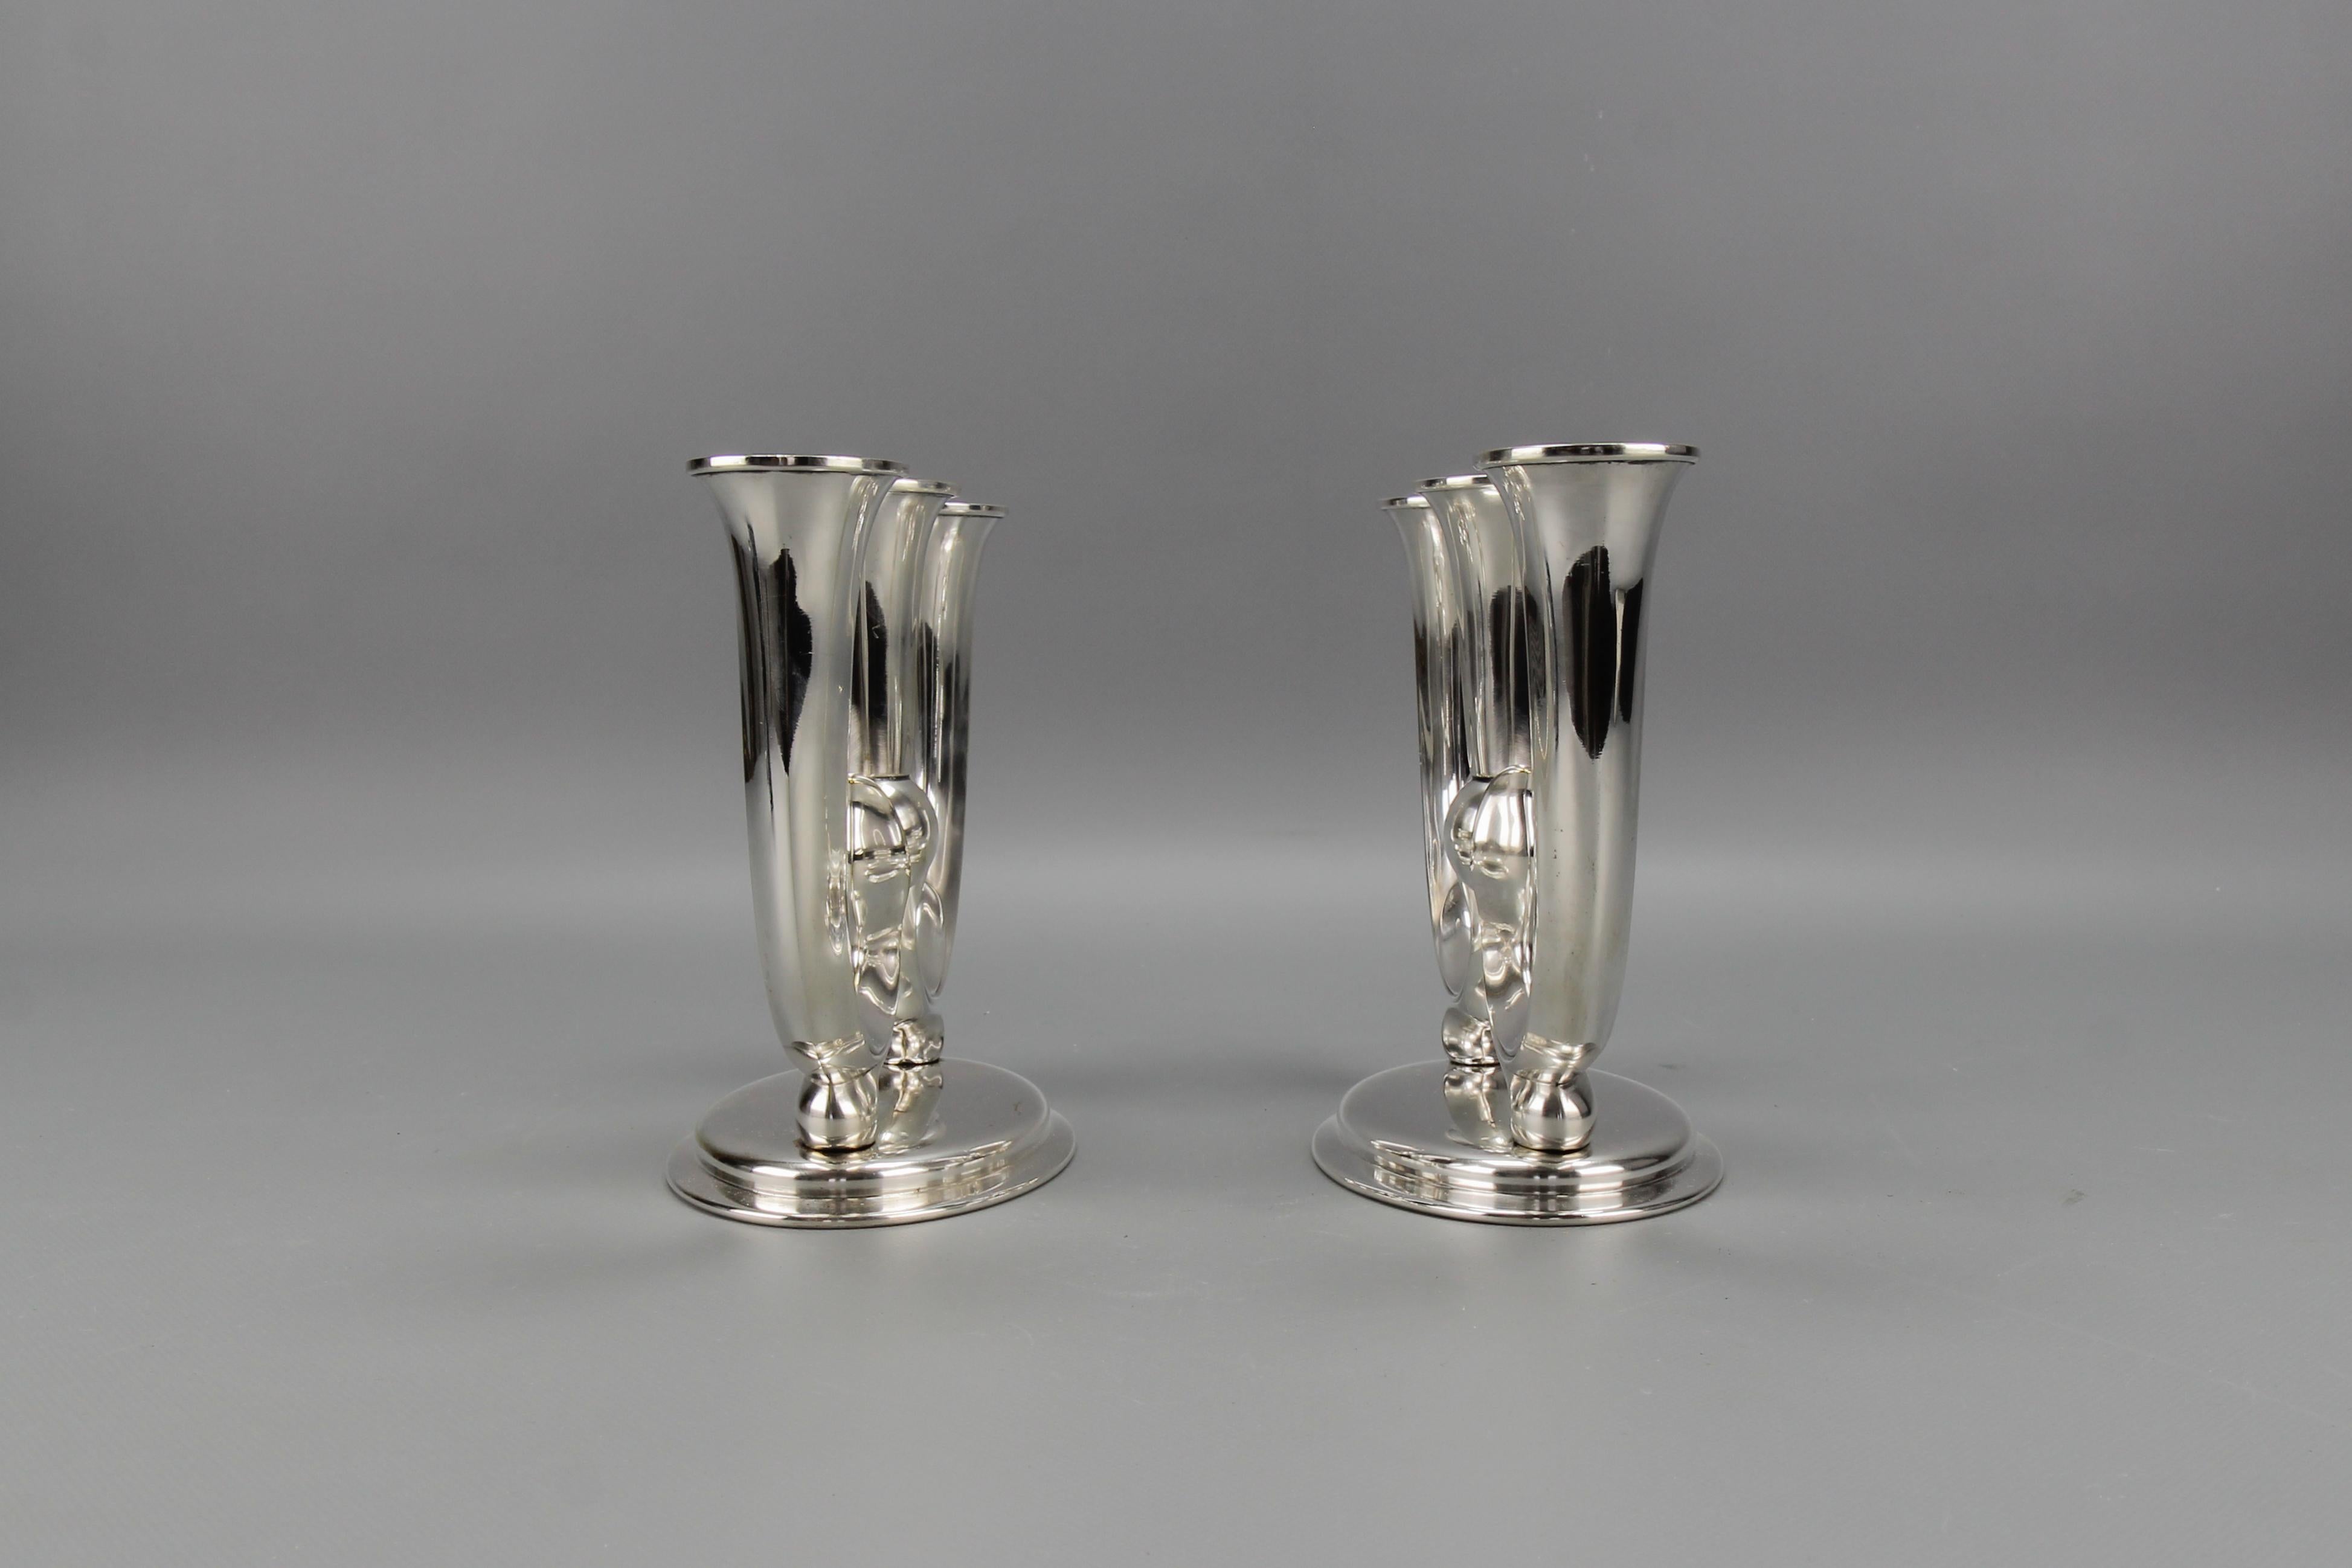 Mid-20th Century Pair of German WMF Art Deco Three-Arm Candle Holders For Sale